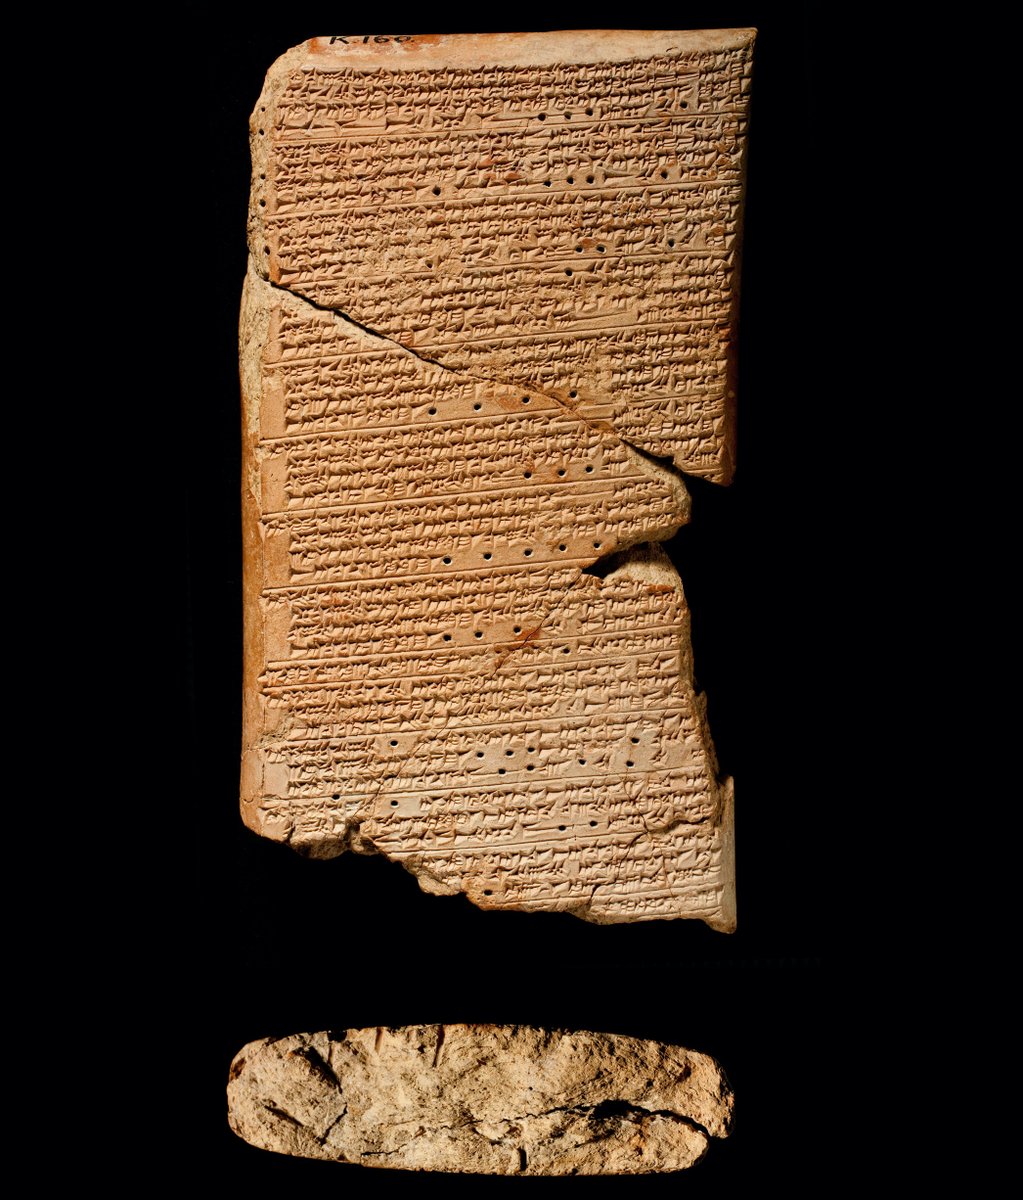 One clue about the long history of “astronomology” (h/t  @willismonroe) in ancient Mesopotamia was found in the Library of Ashurbanipal. The “Venus Tablet of Ammisaduqa” is a copy of observations of Venus from ~1000 years earlier that’s also part of a larger textbook of omens.